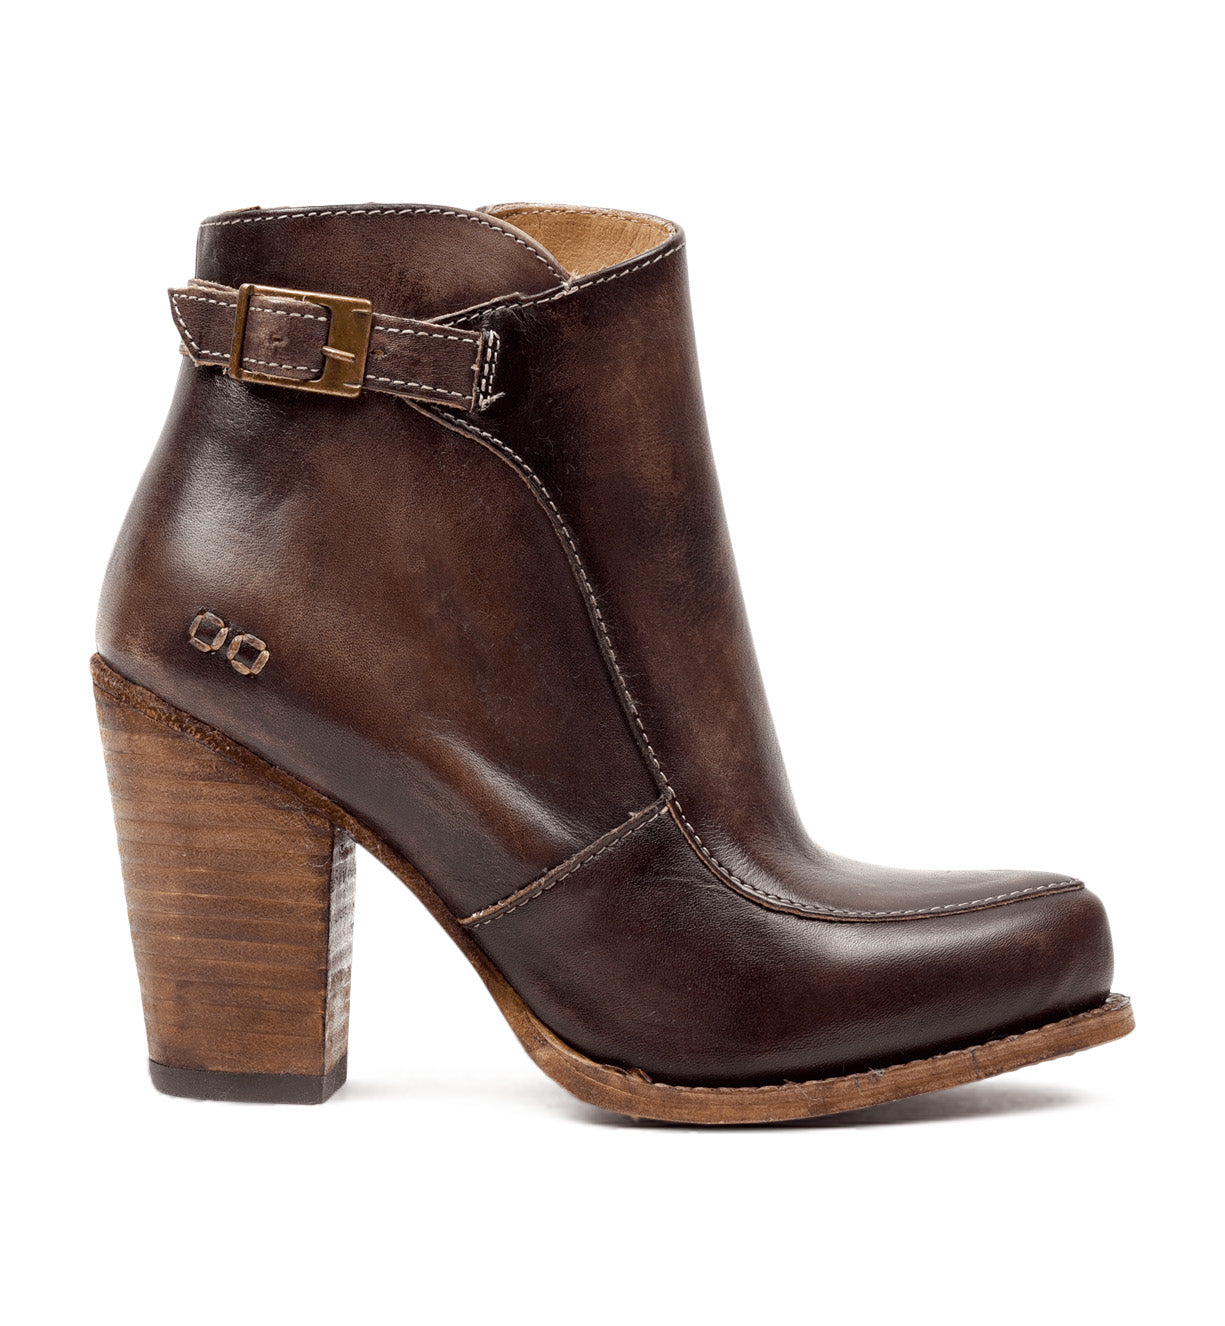 A brown leather ankle boot with a wooden heel named Isla by Bed Stu.